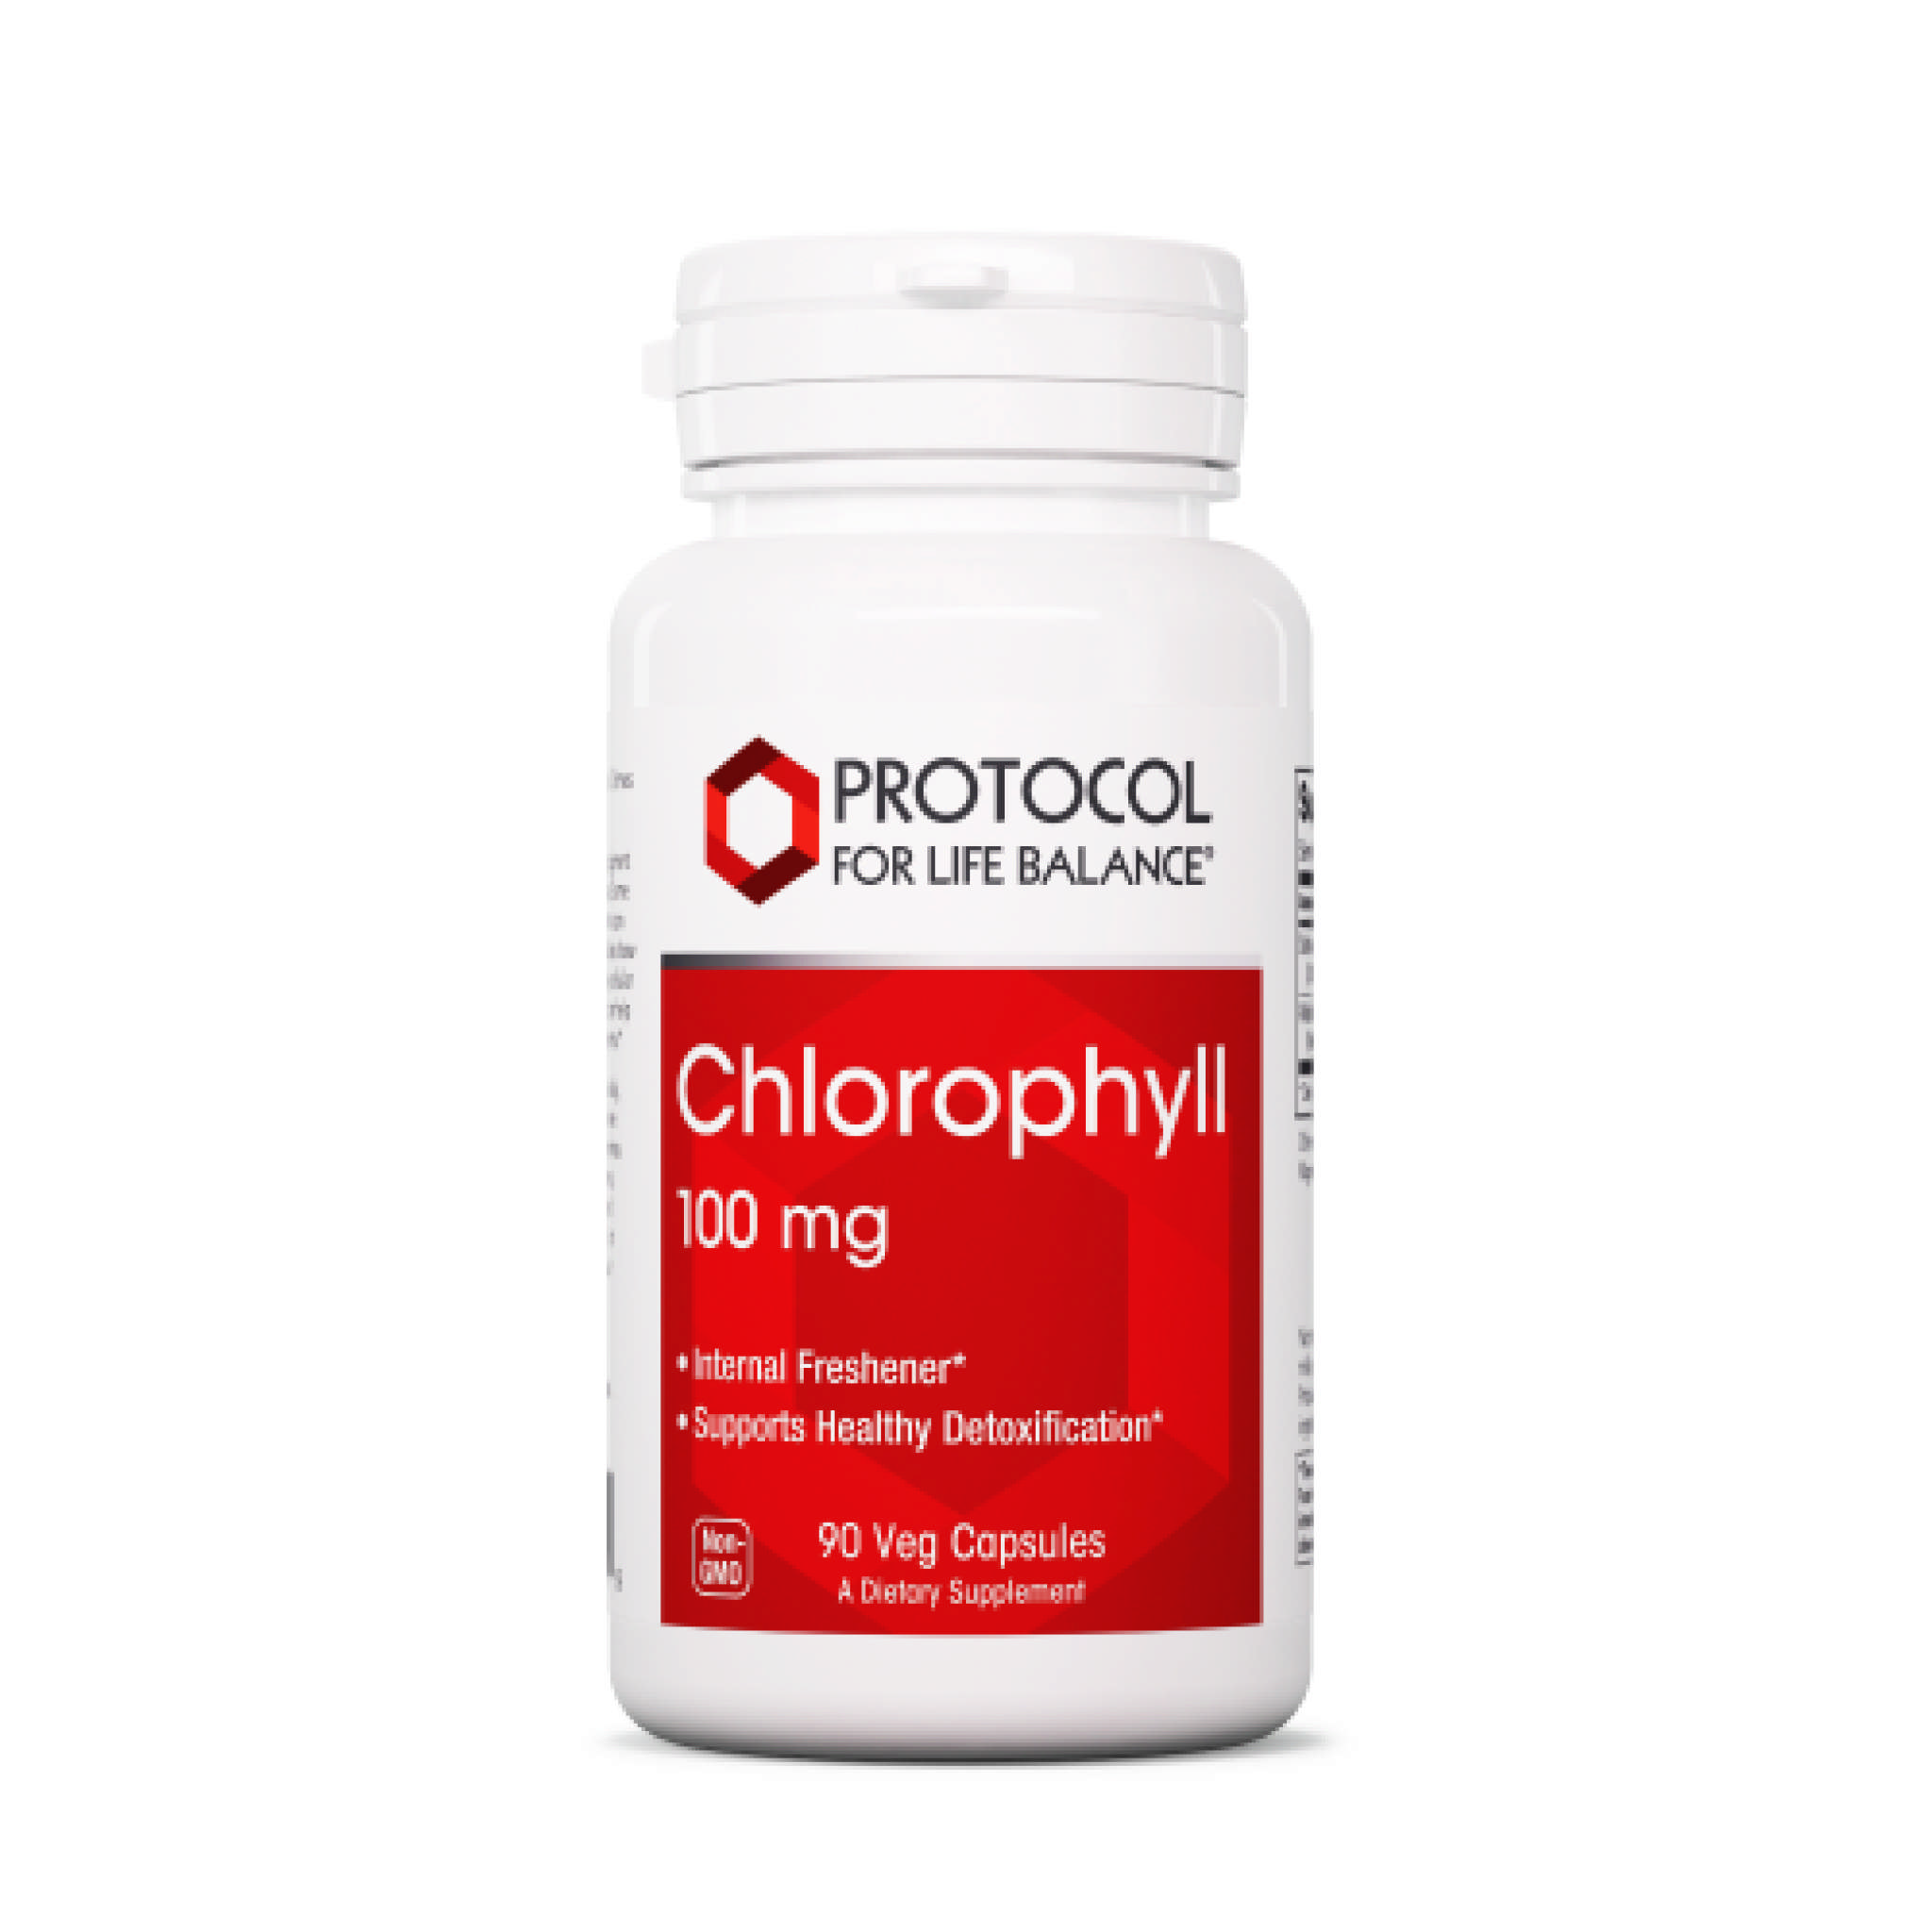 Protocol For Life Balance - Chlorophyll 100 mg vCap